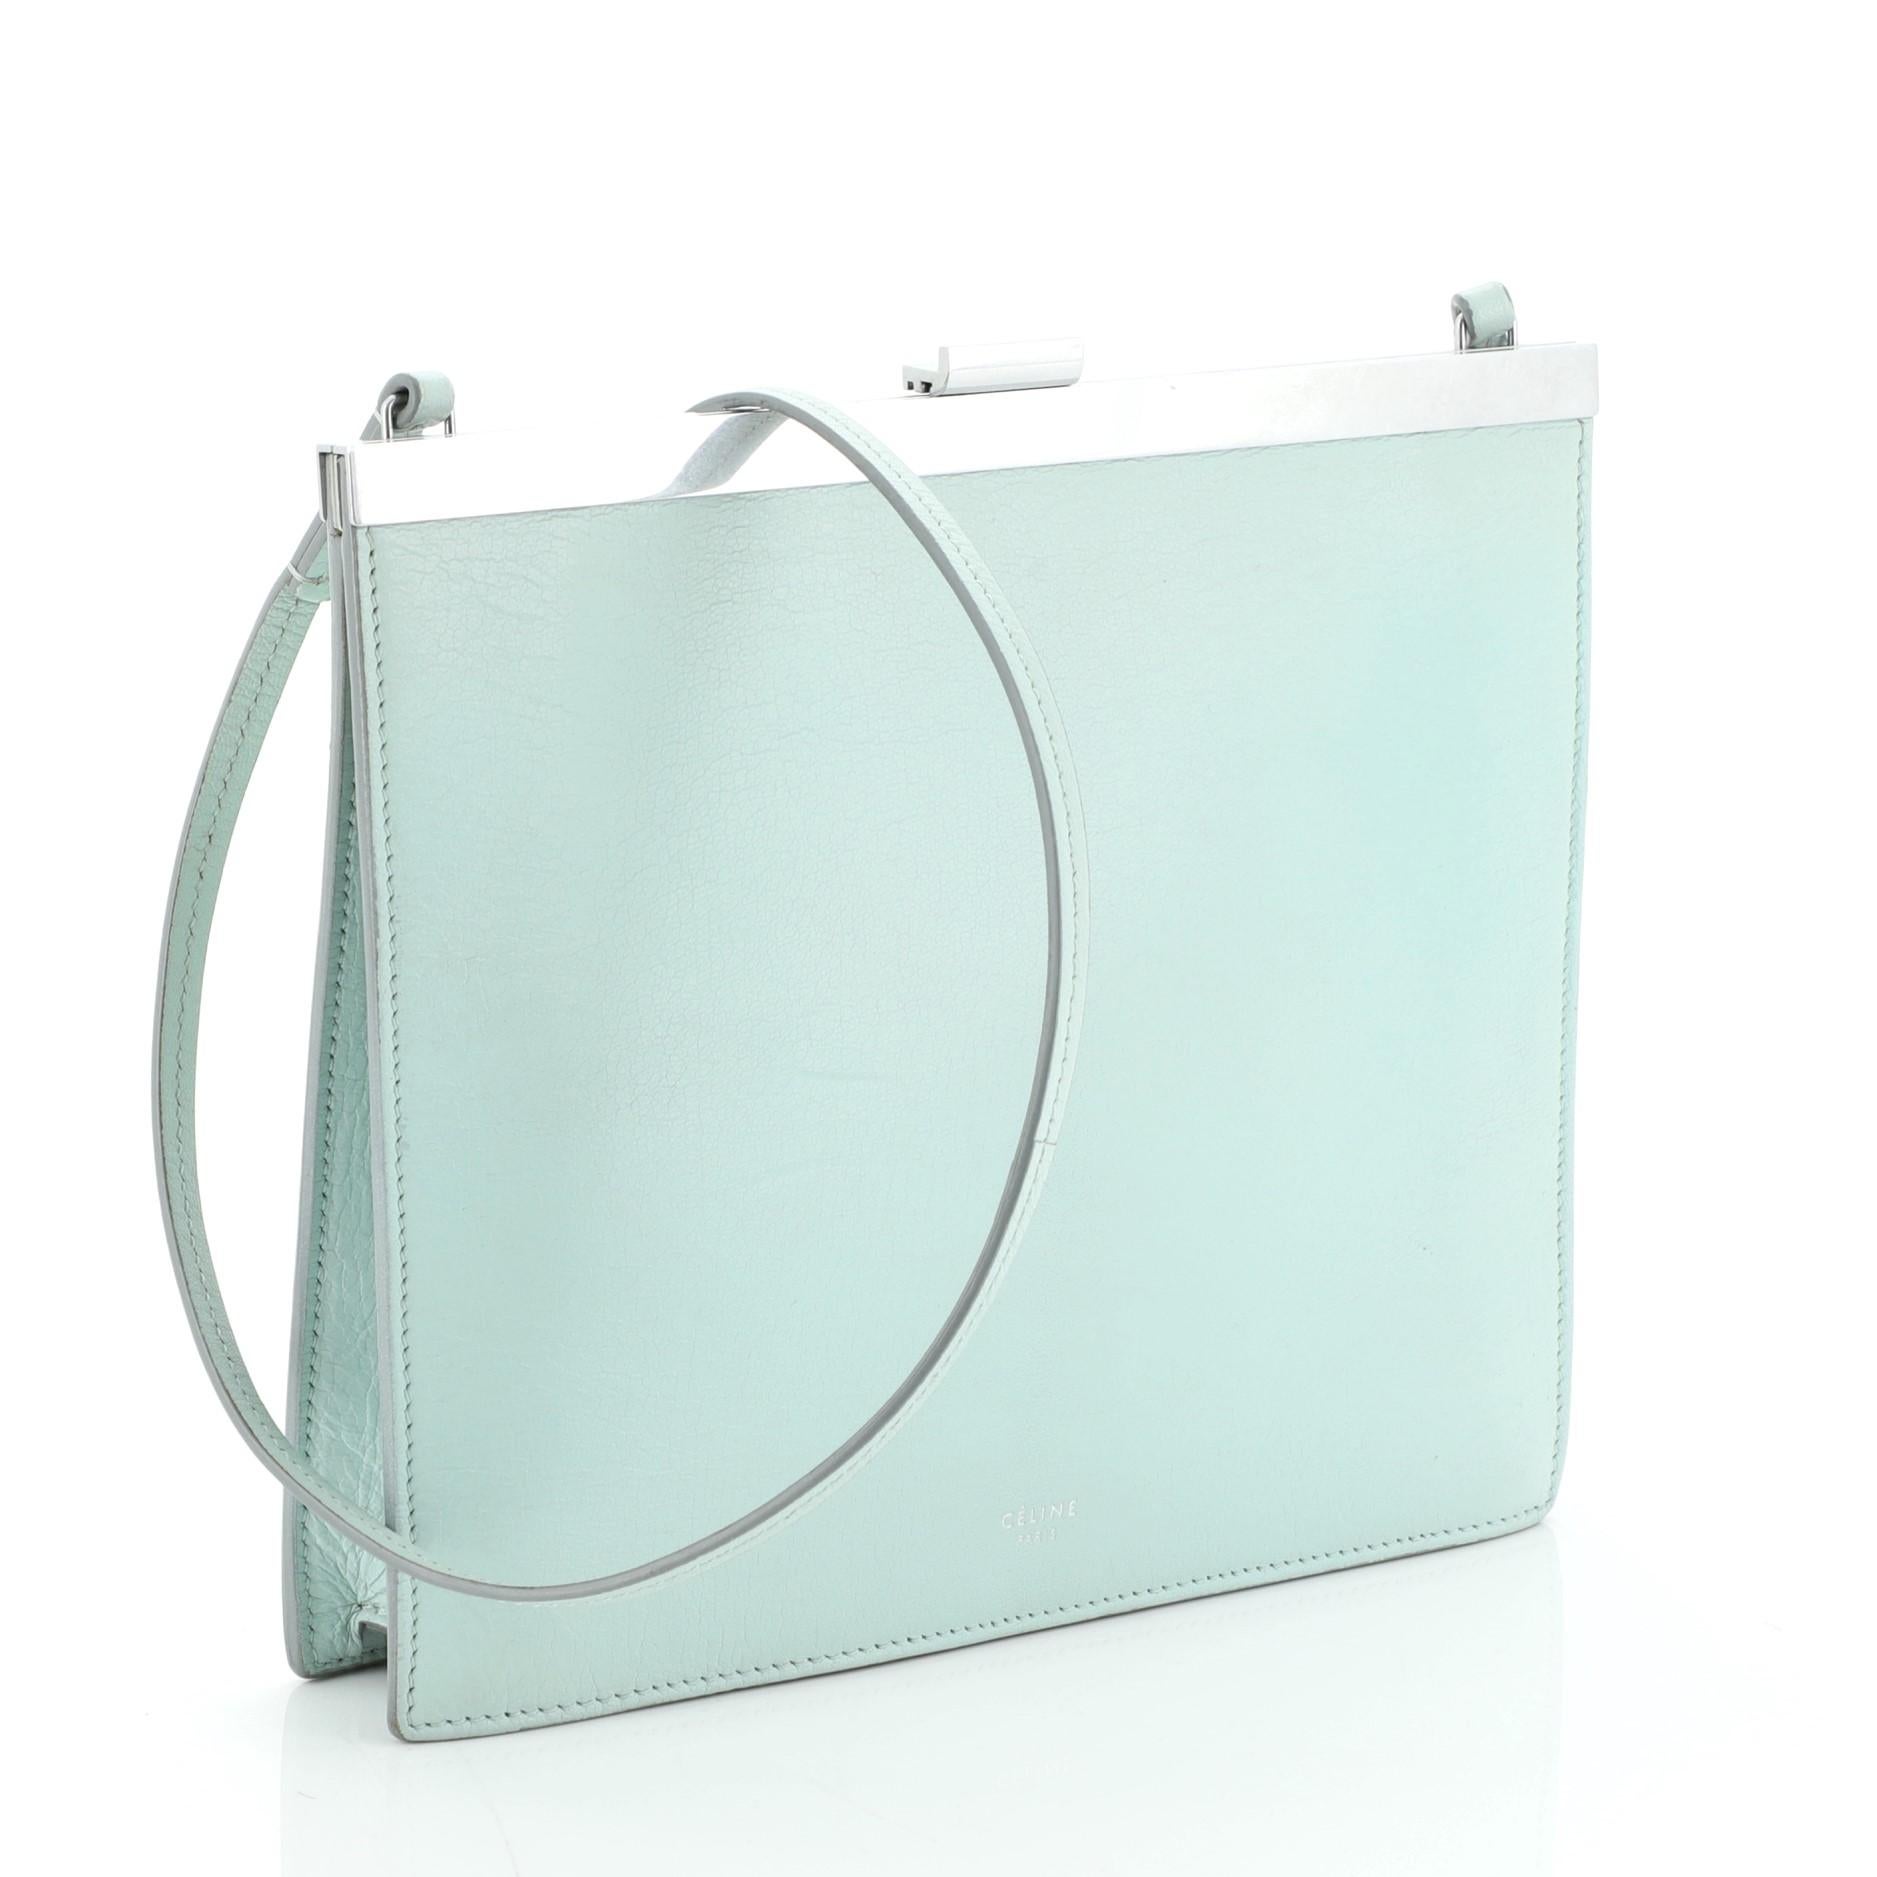 This Celine Clasp Crossbody Bag Leather Mini, crafted in green leather, features slim leather shoulder strap, stamped Celine logo, framed top, and silver-tone hardware. Its clasp closure opens to a yellow leather interior with slip pockets.